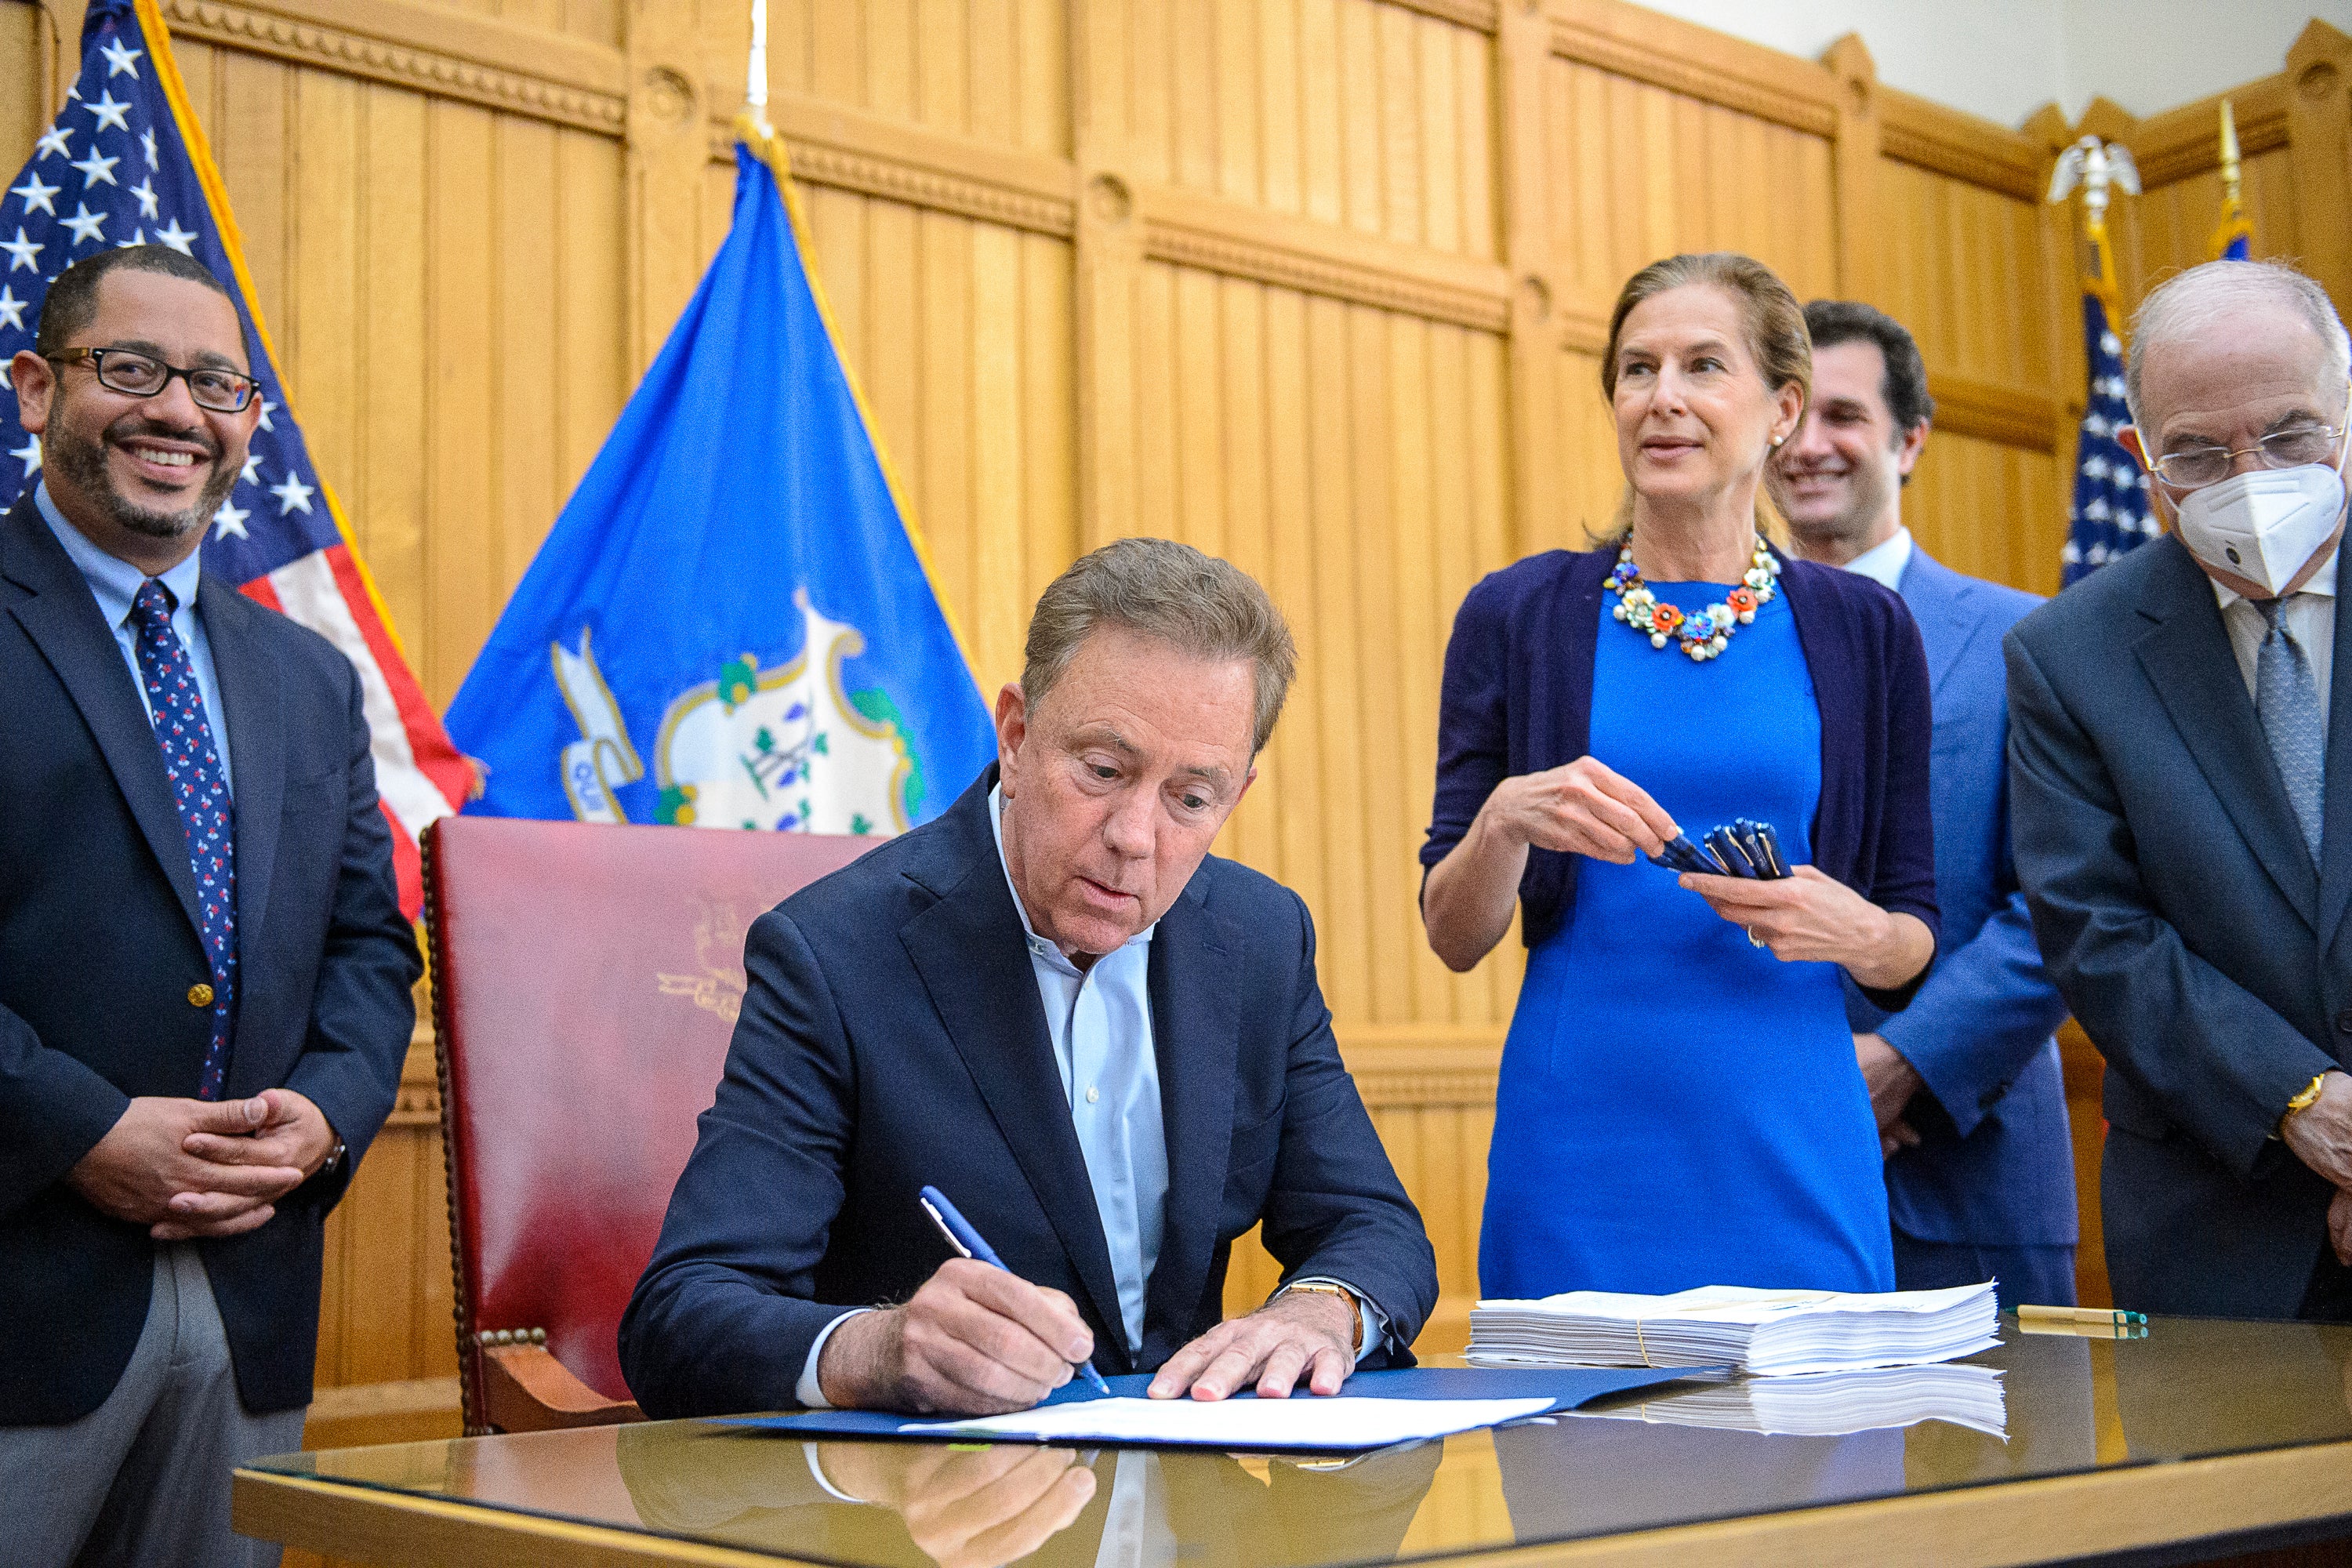 Ned Lamont signs bill allowing 21-year-olds and over to use weed